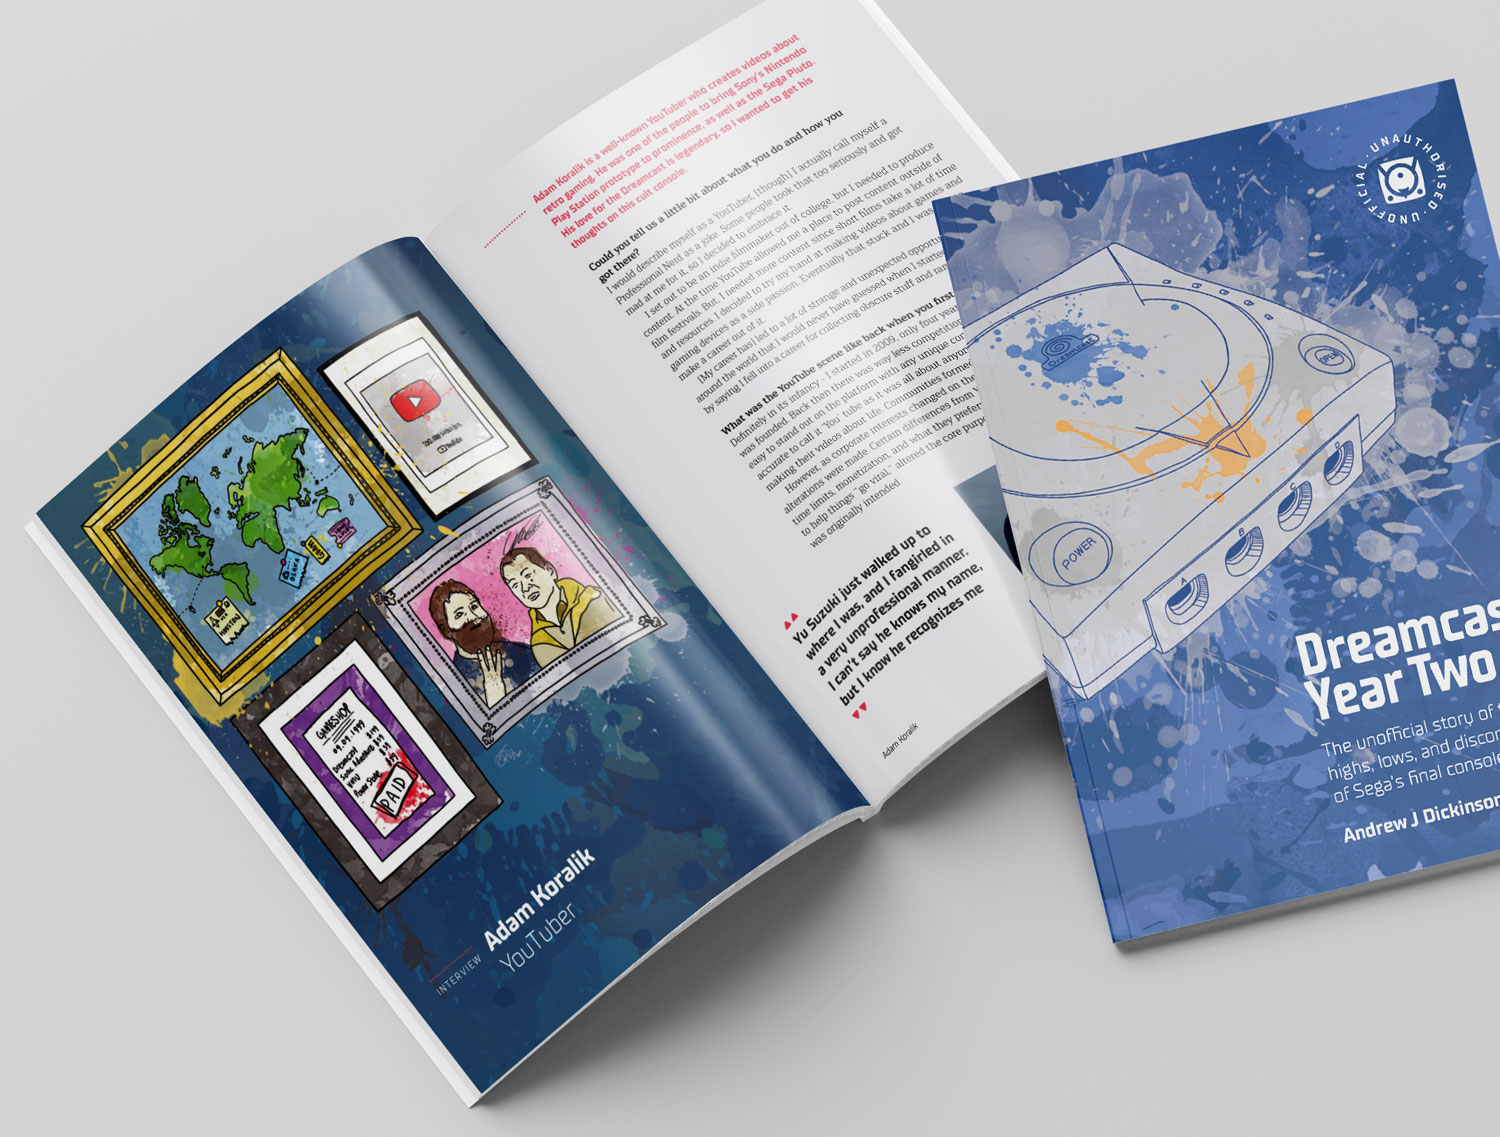 Dreamcast Year Two Book Illustrations | Front Cover and Interview Illustration Spread